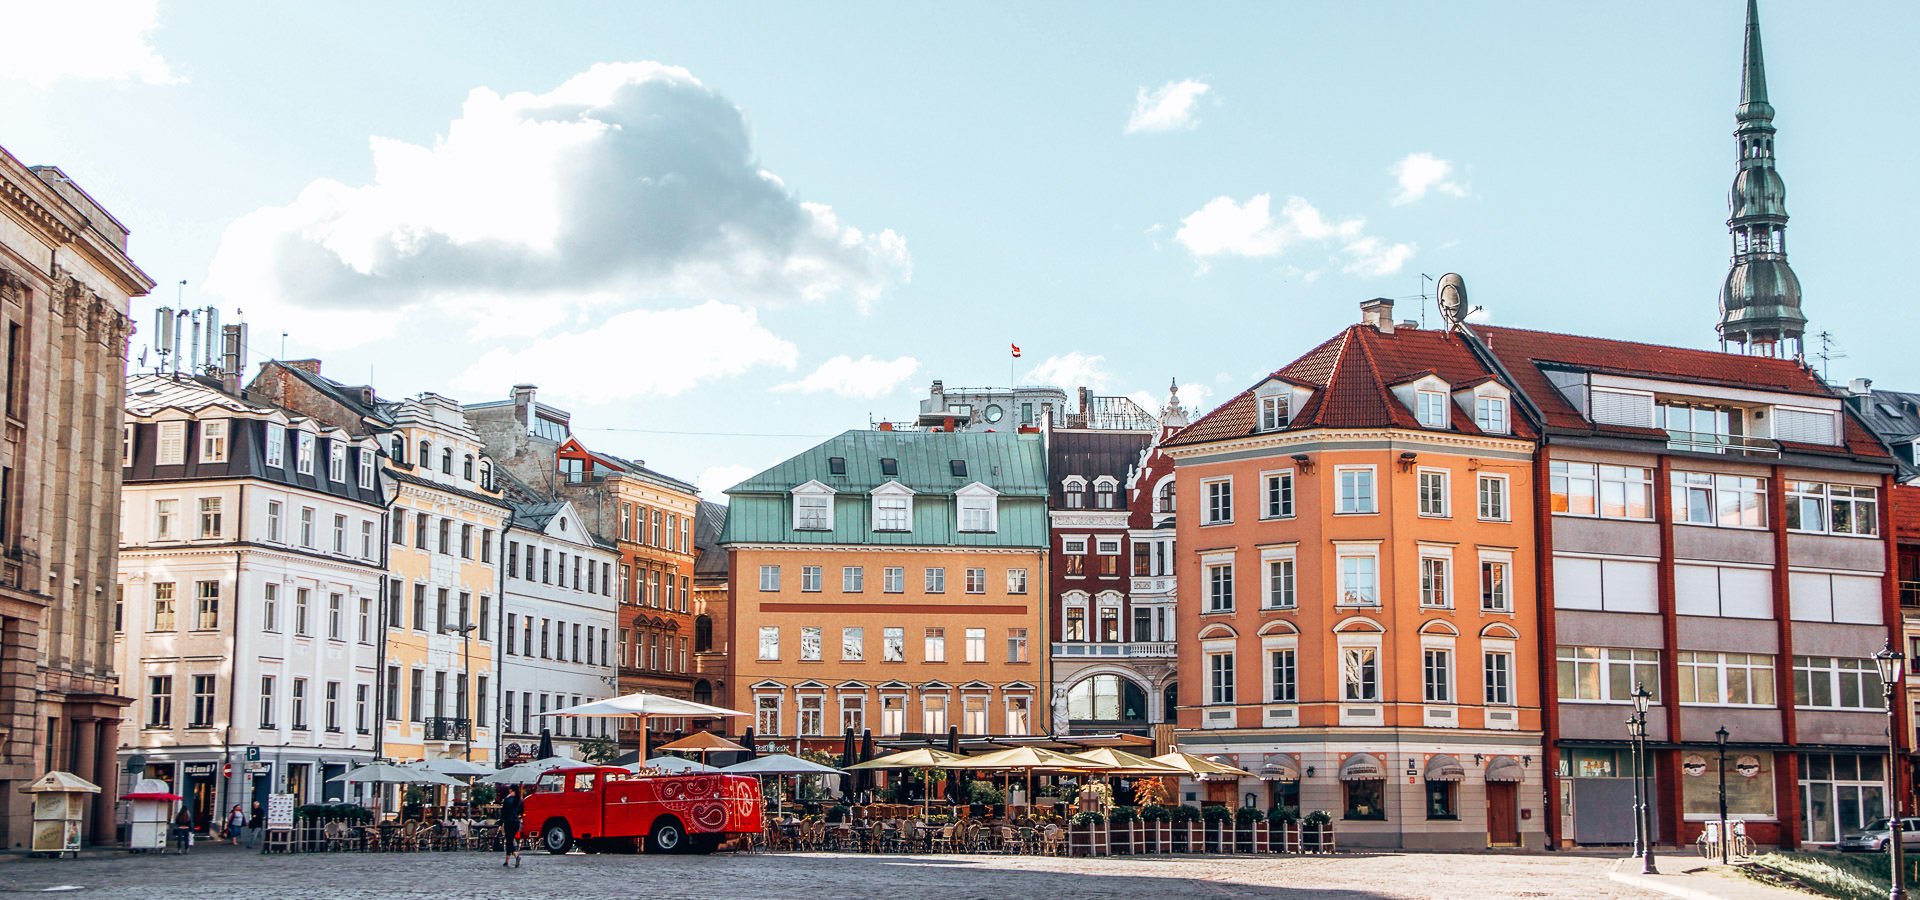 A Fabulous Guide To One Day In Riga Latvia | One Day in Riga Latvia 6